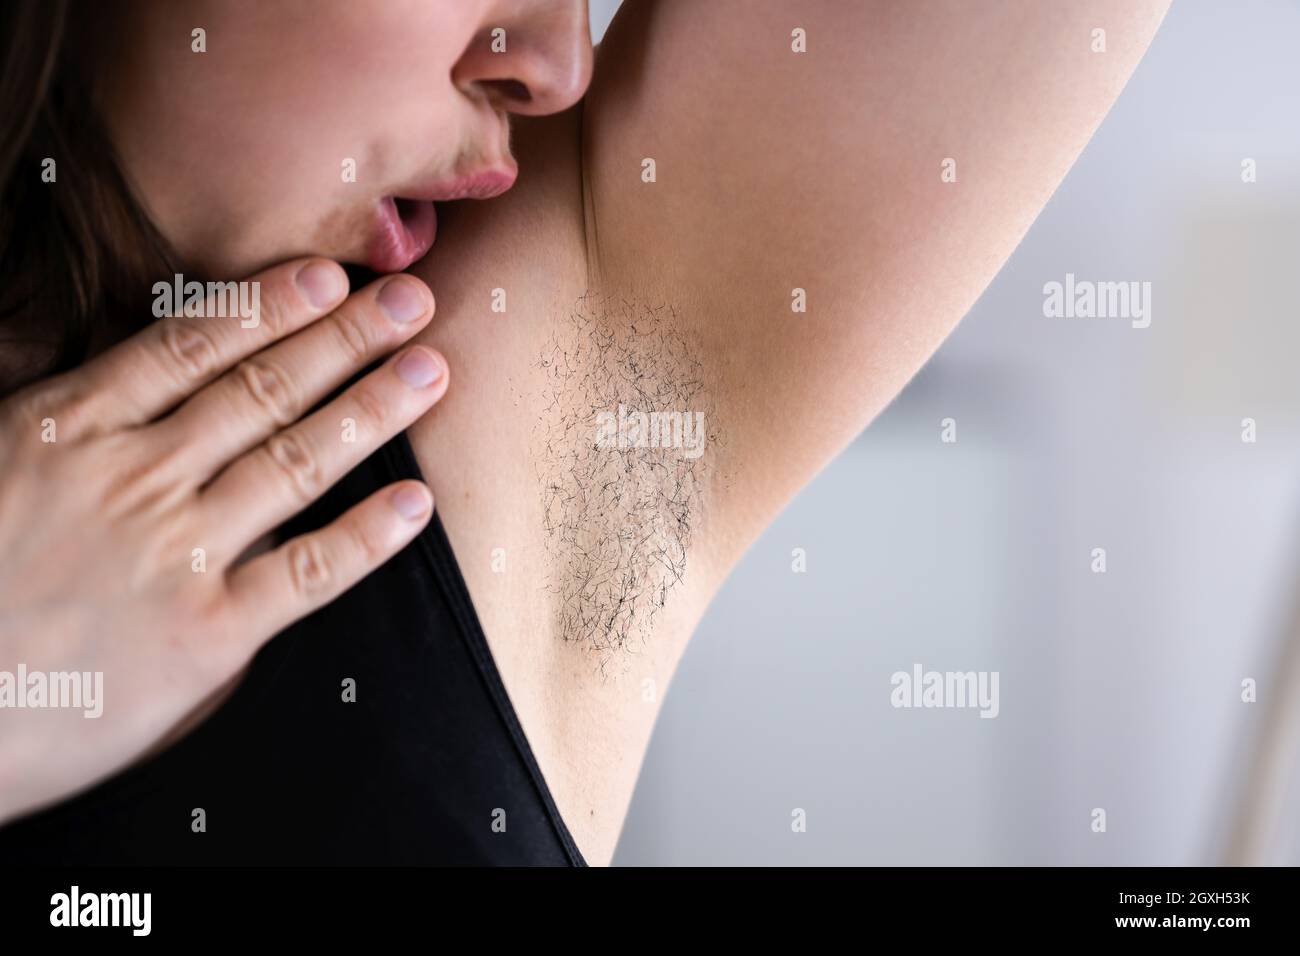 Hairy Woman Underarm. Women Armpit Hair And Body Care Stock Photo